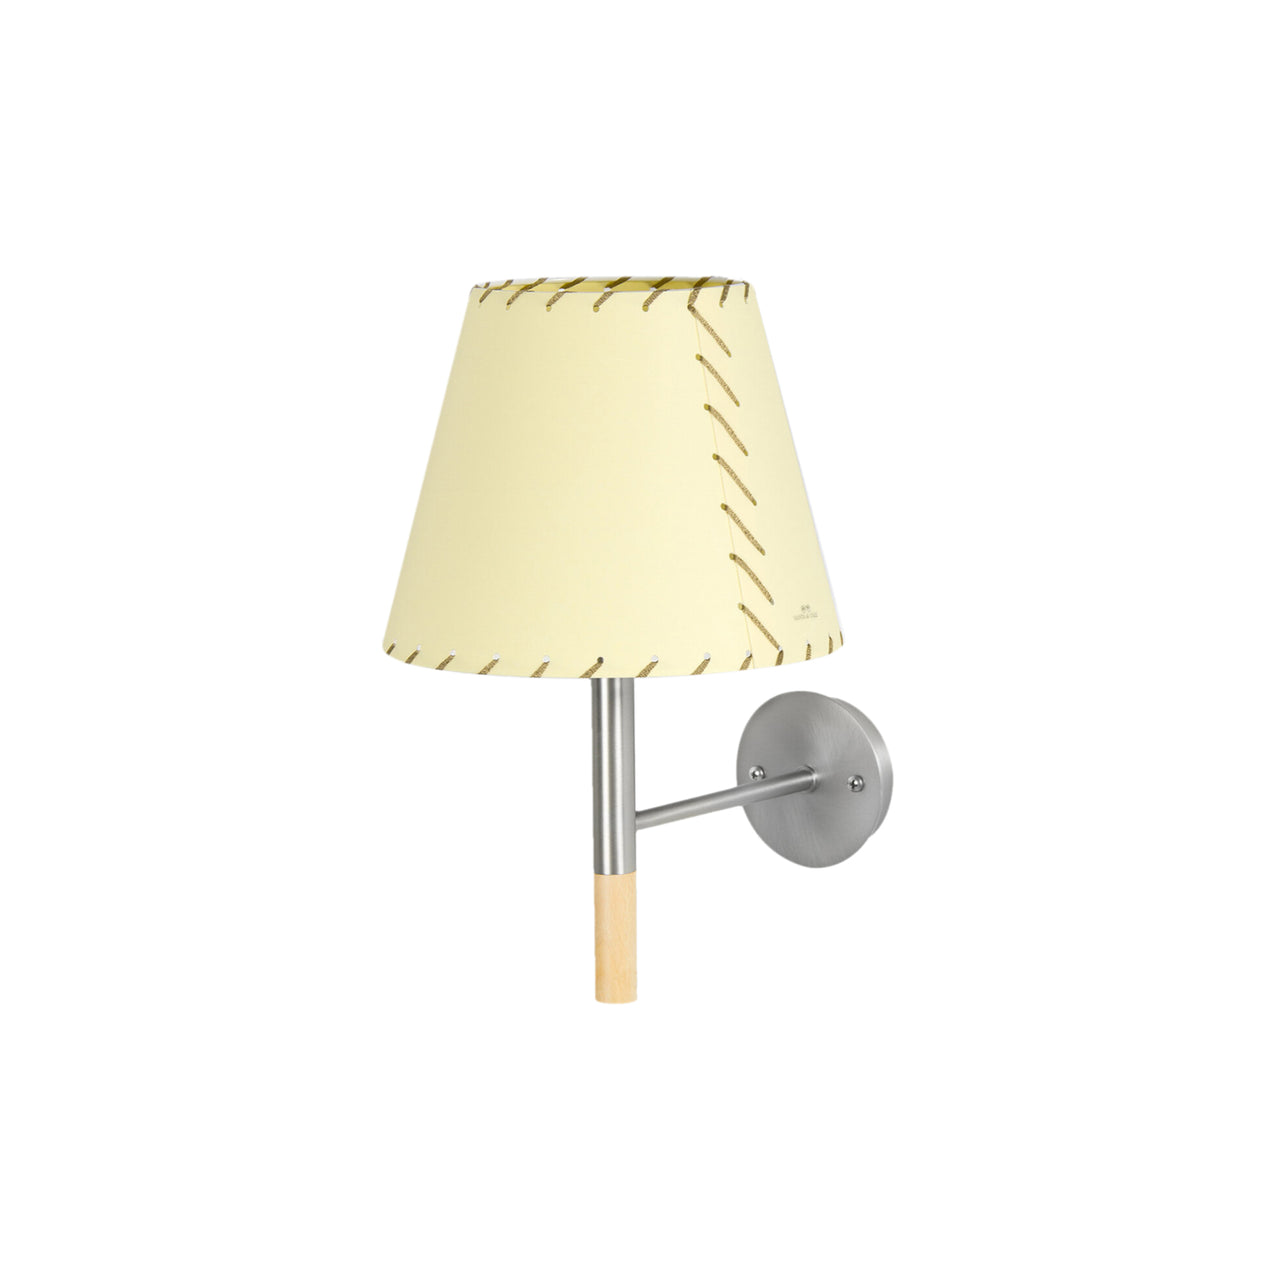 BC Wall Lamp: BC2 + Stitched Beige Parchment